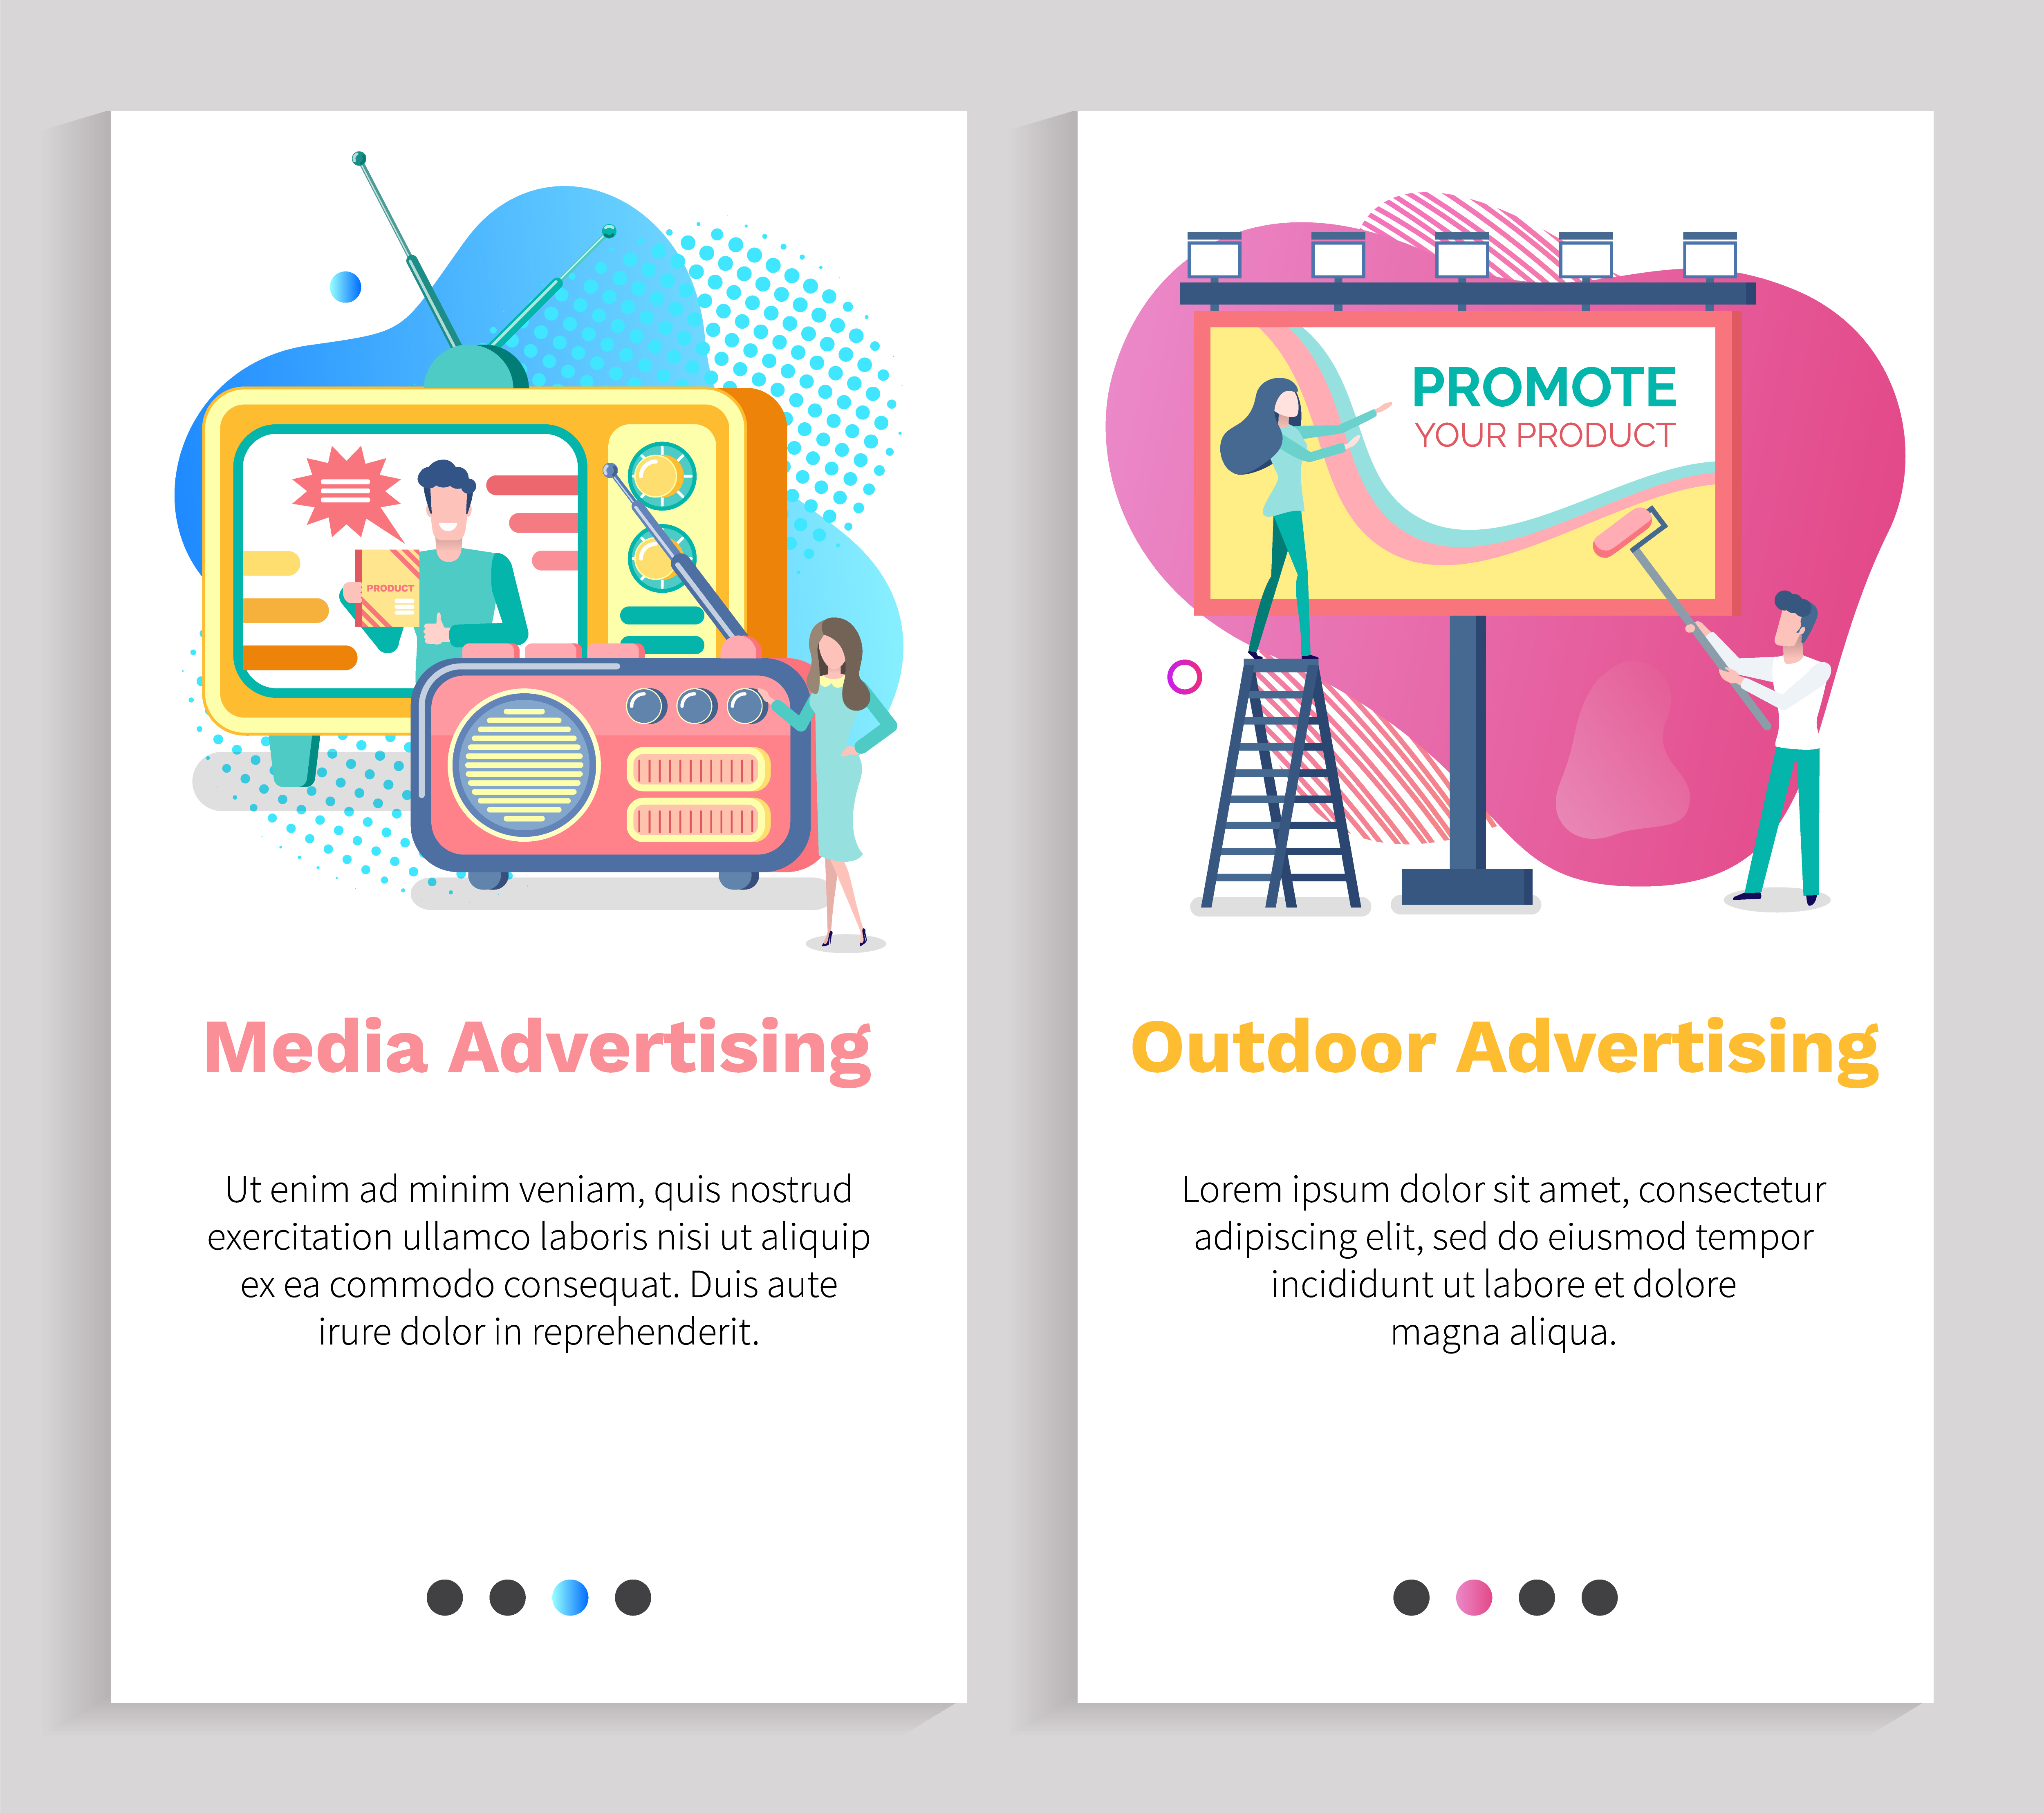 Media advertising vector, outdoor advertisement woman on ladder with billboard, radio and tv set with program on live, host on television. Website or slider app, landing page flat style. Outdoor Advertisement Media Advertising Vector